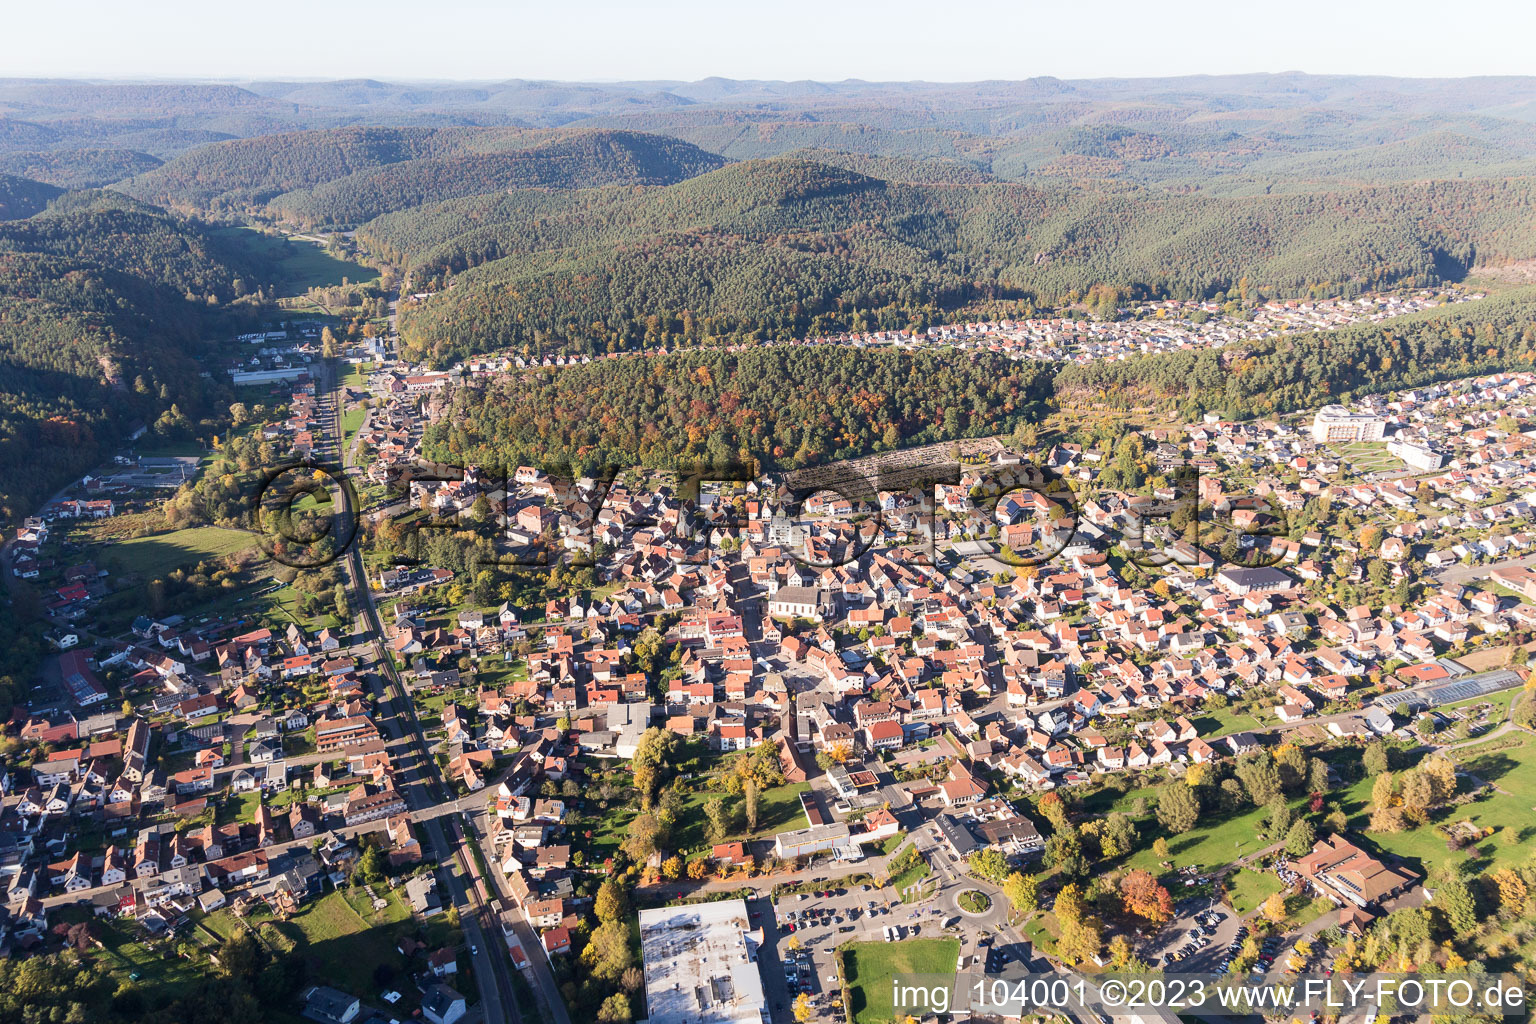 Dahn in the state Rhineland-Palatinate, Germany from a drone